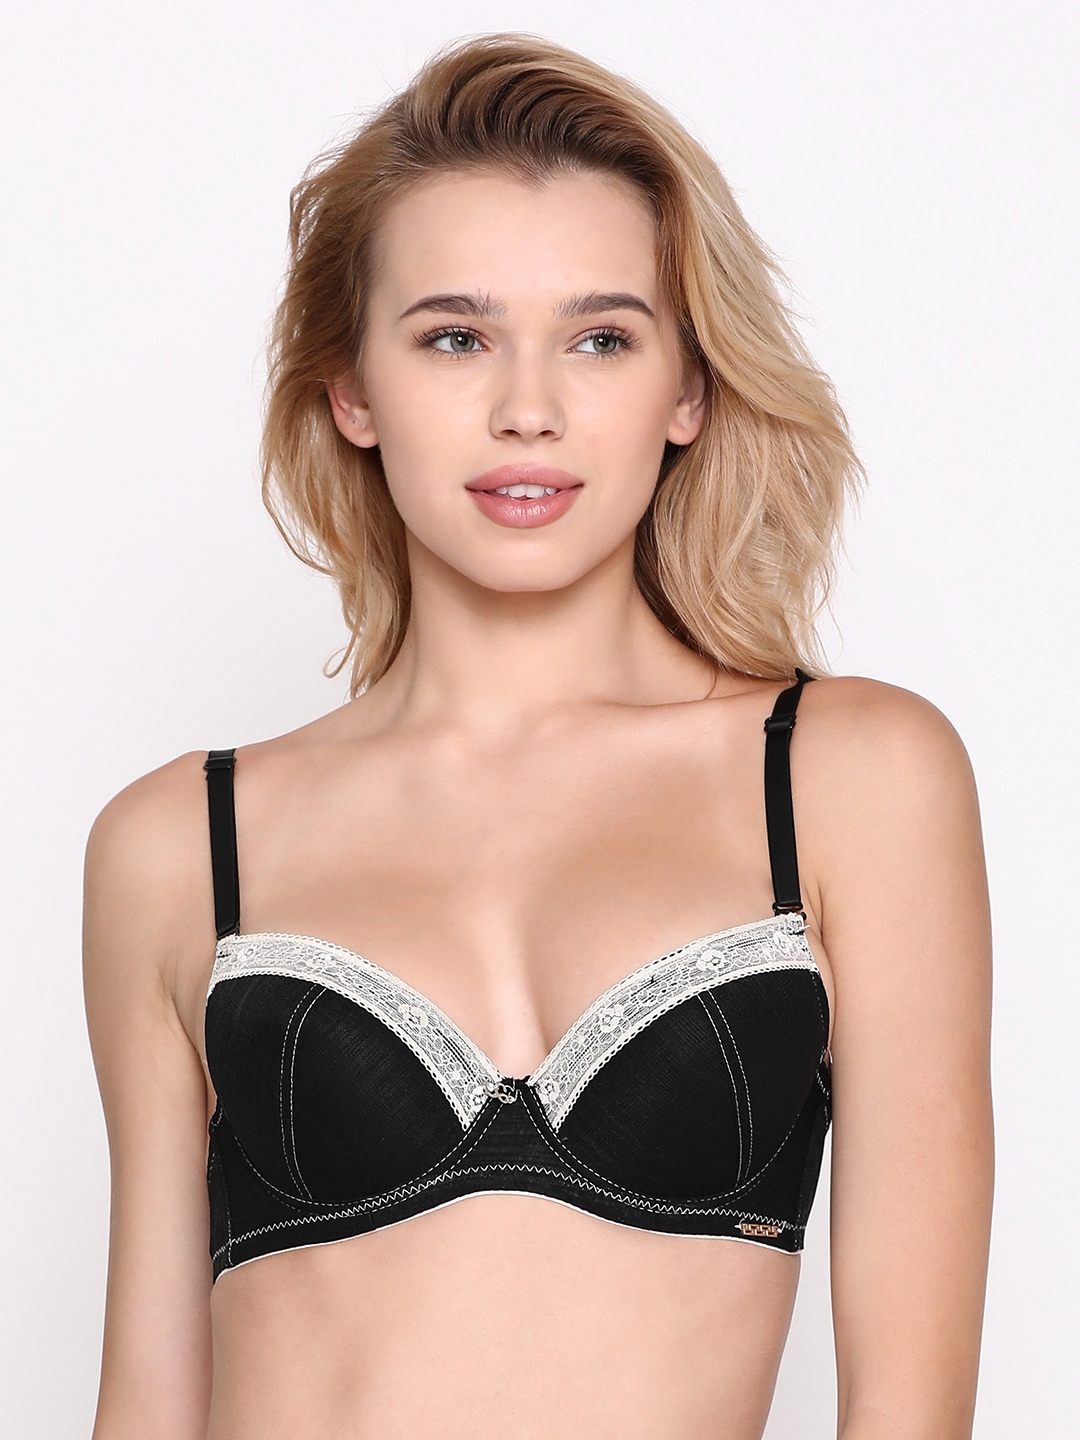 shyaway Black Lace Underwired Lightly Padded Push-Up Bra S029